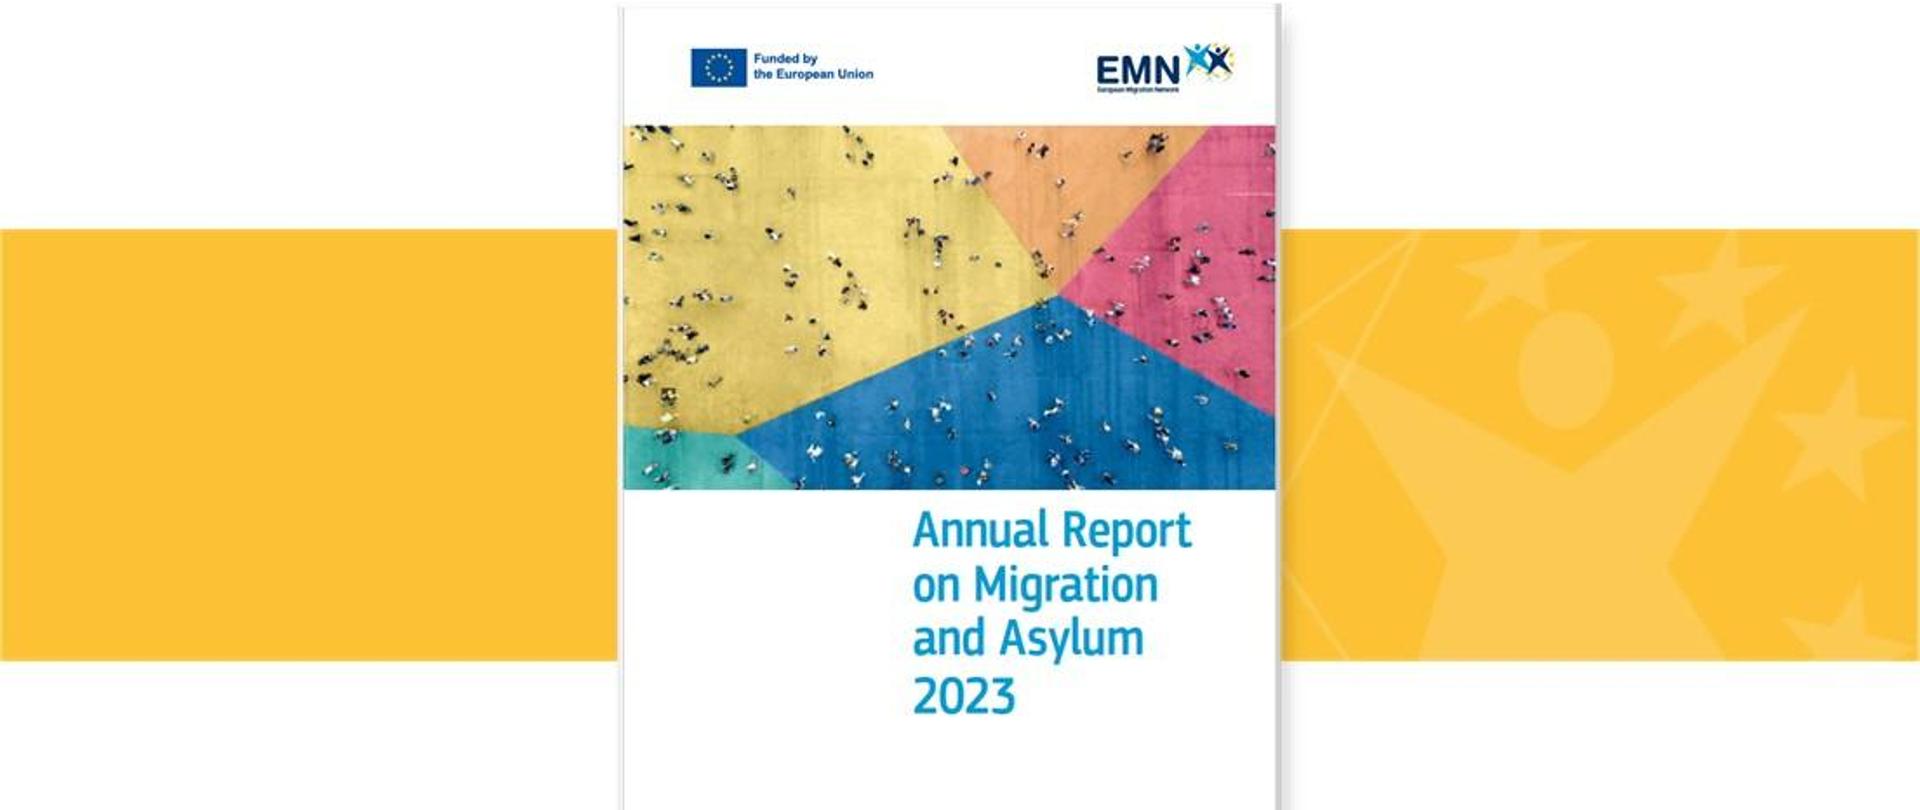 Annual Report on Migration and Asylum 2023